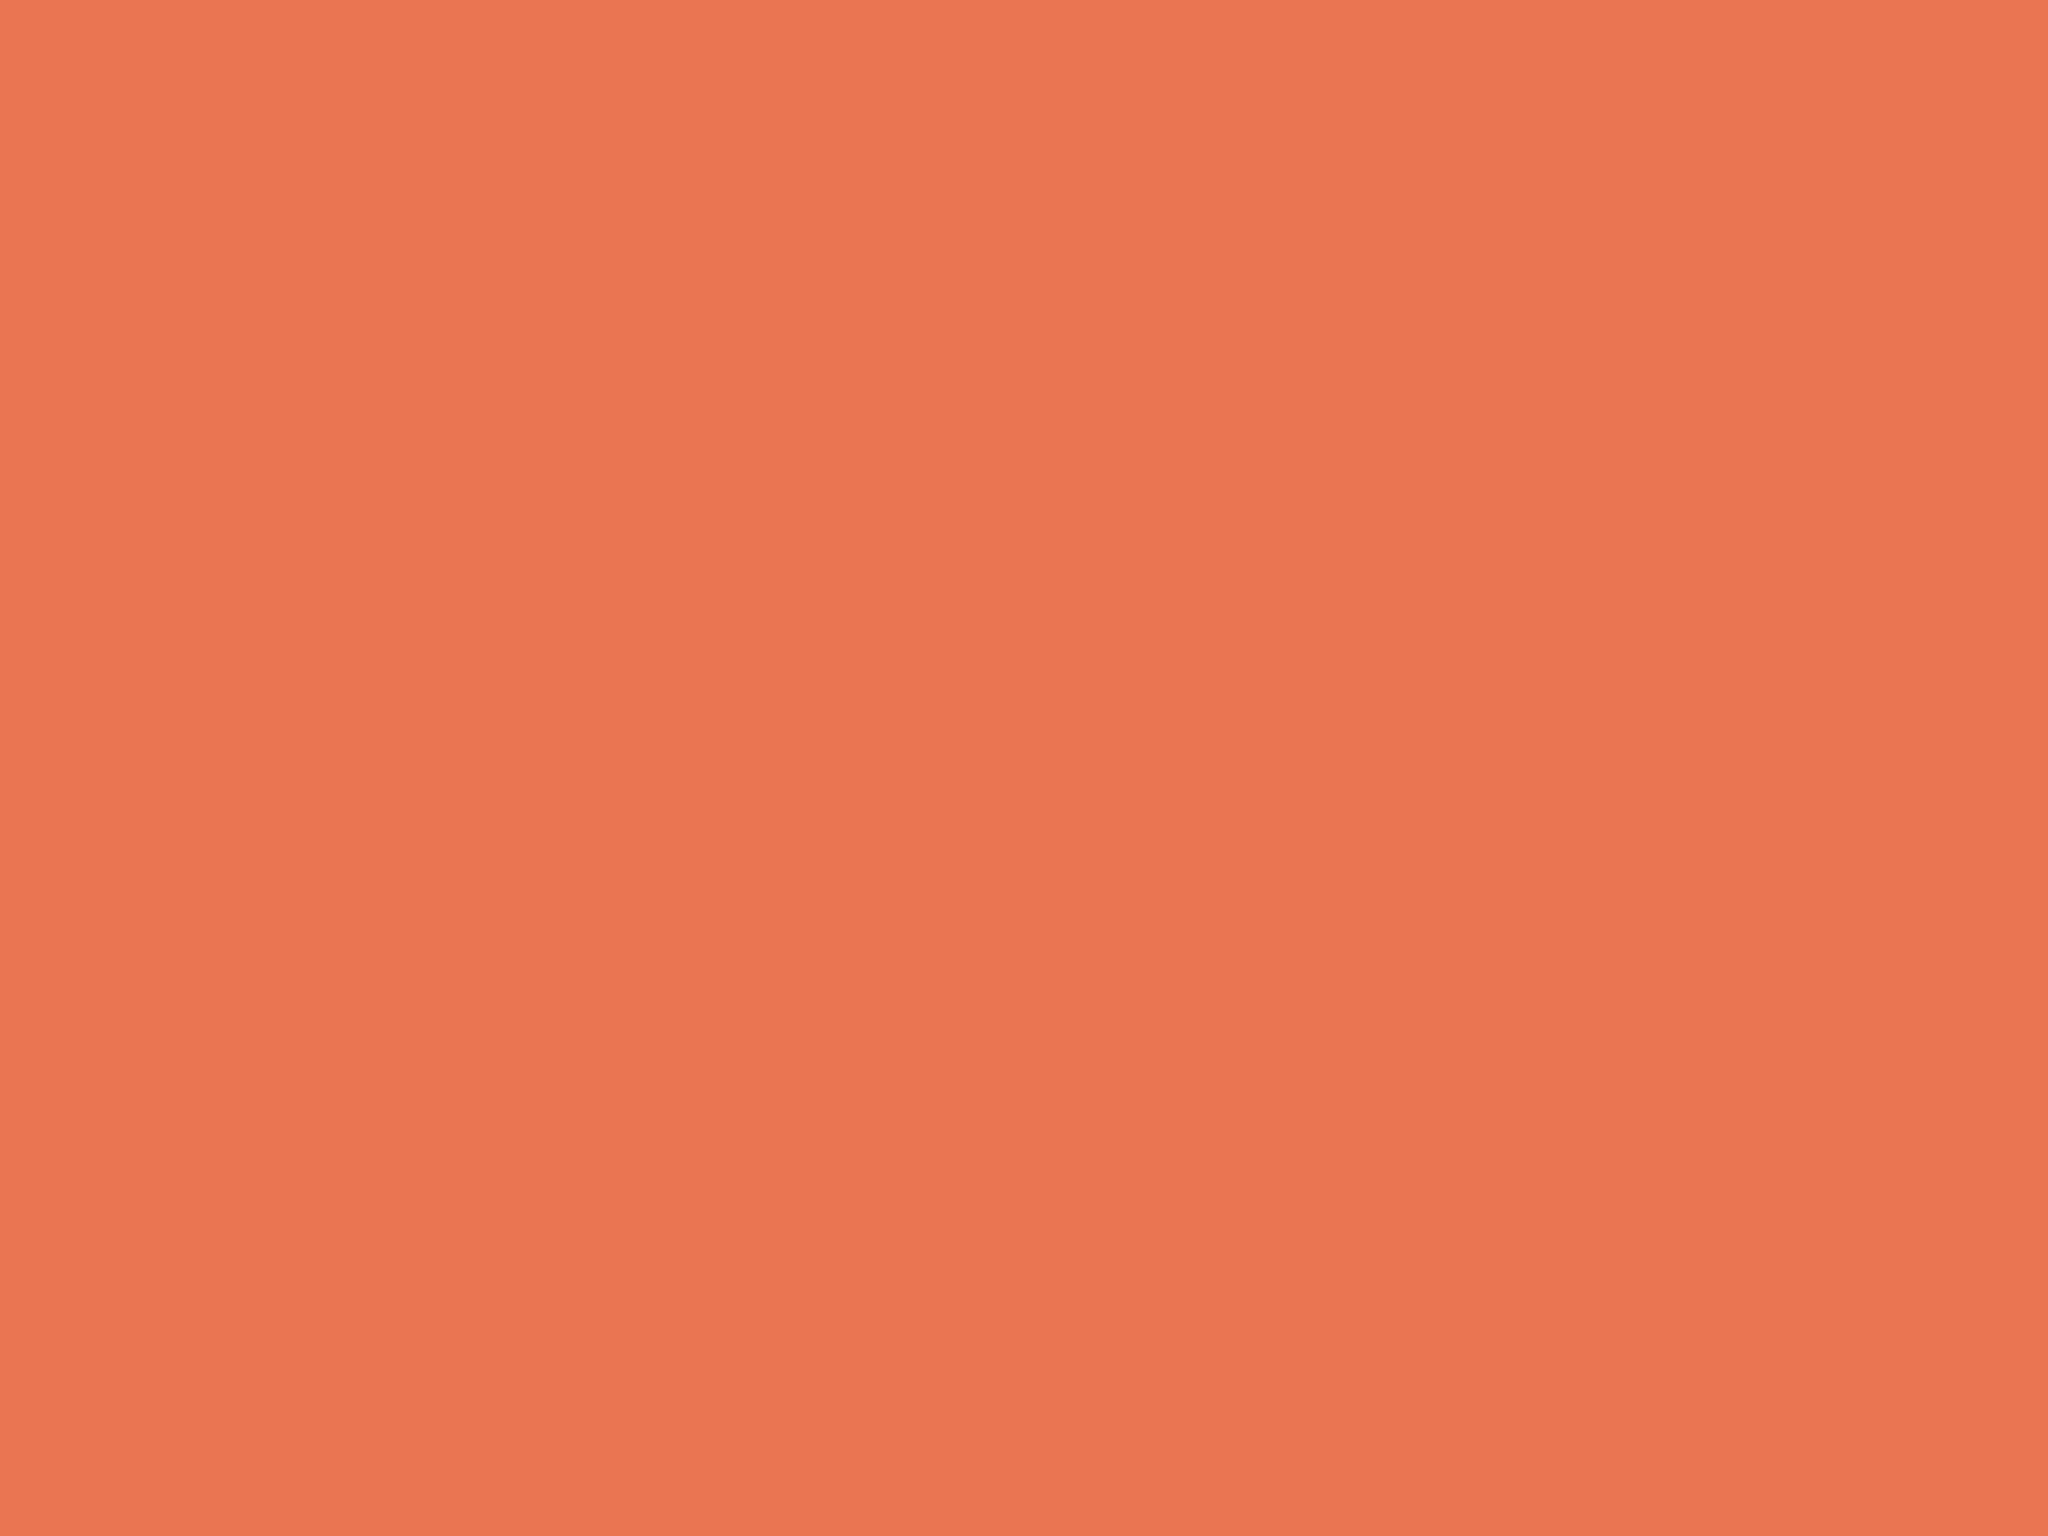 2048x1536 Burnt Sienna Solid Color Background